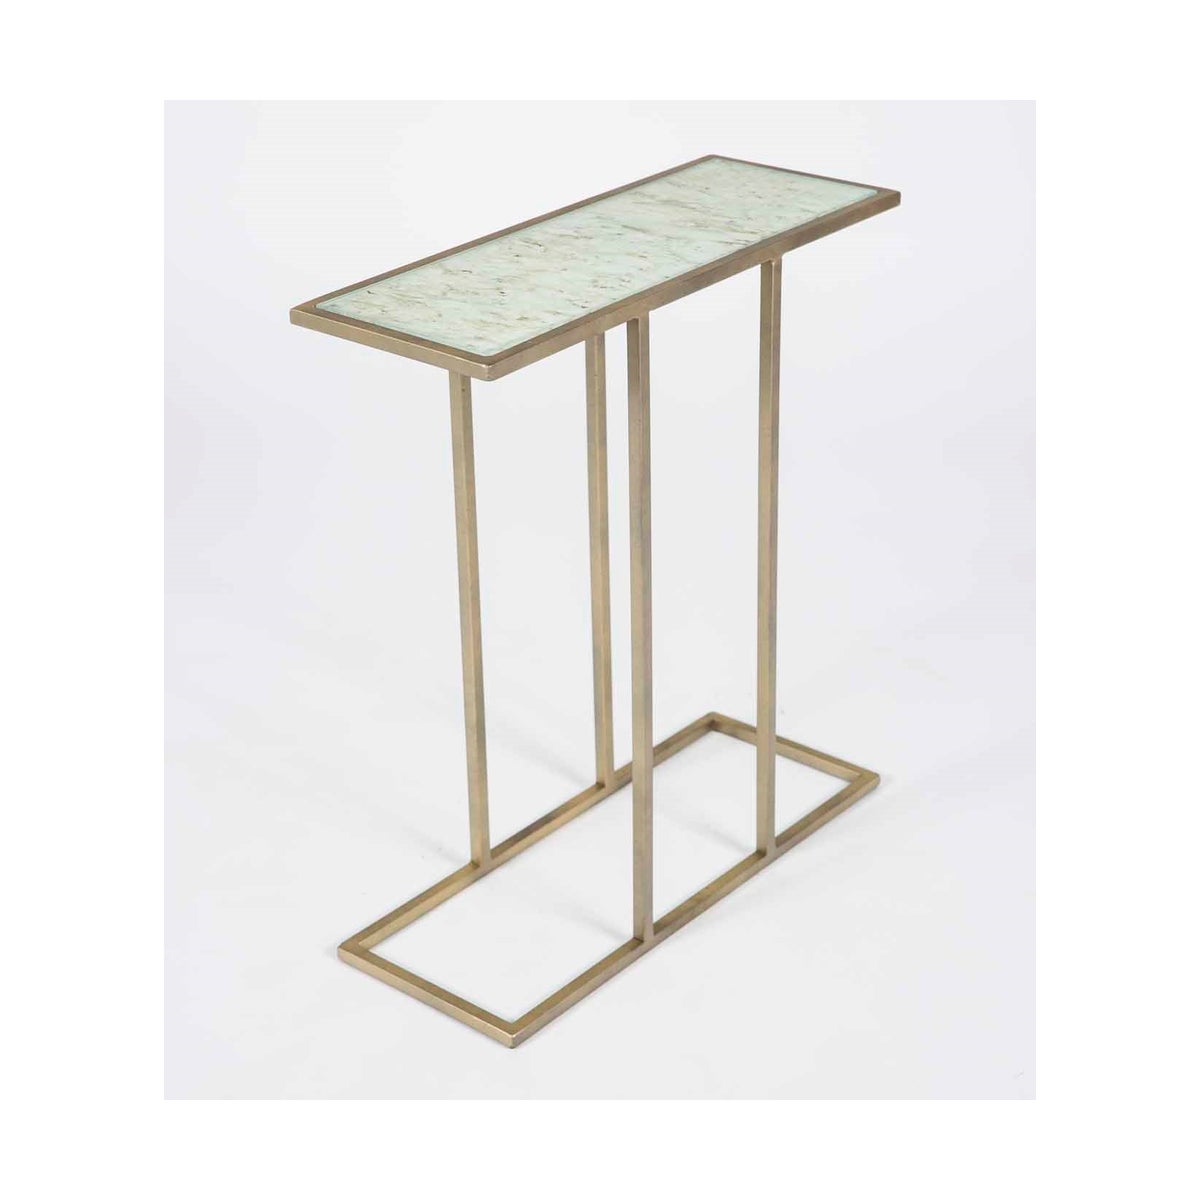 Collin Accent Table in Antique Brass with Glass Top in Wrinkled Linen Finish